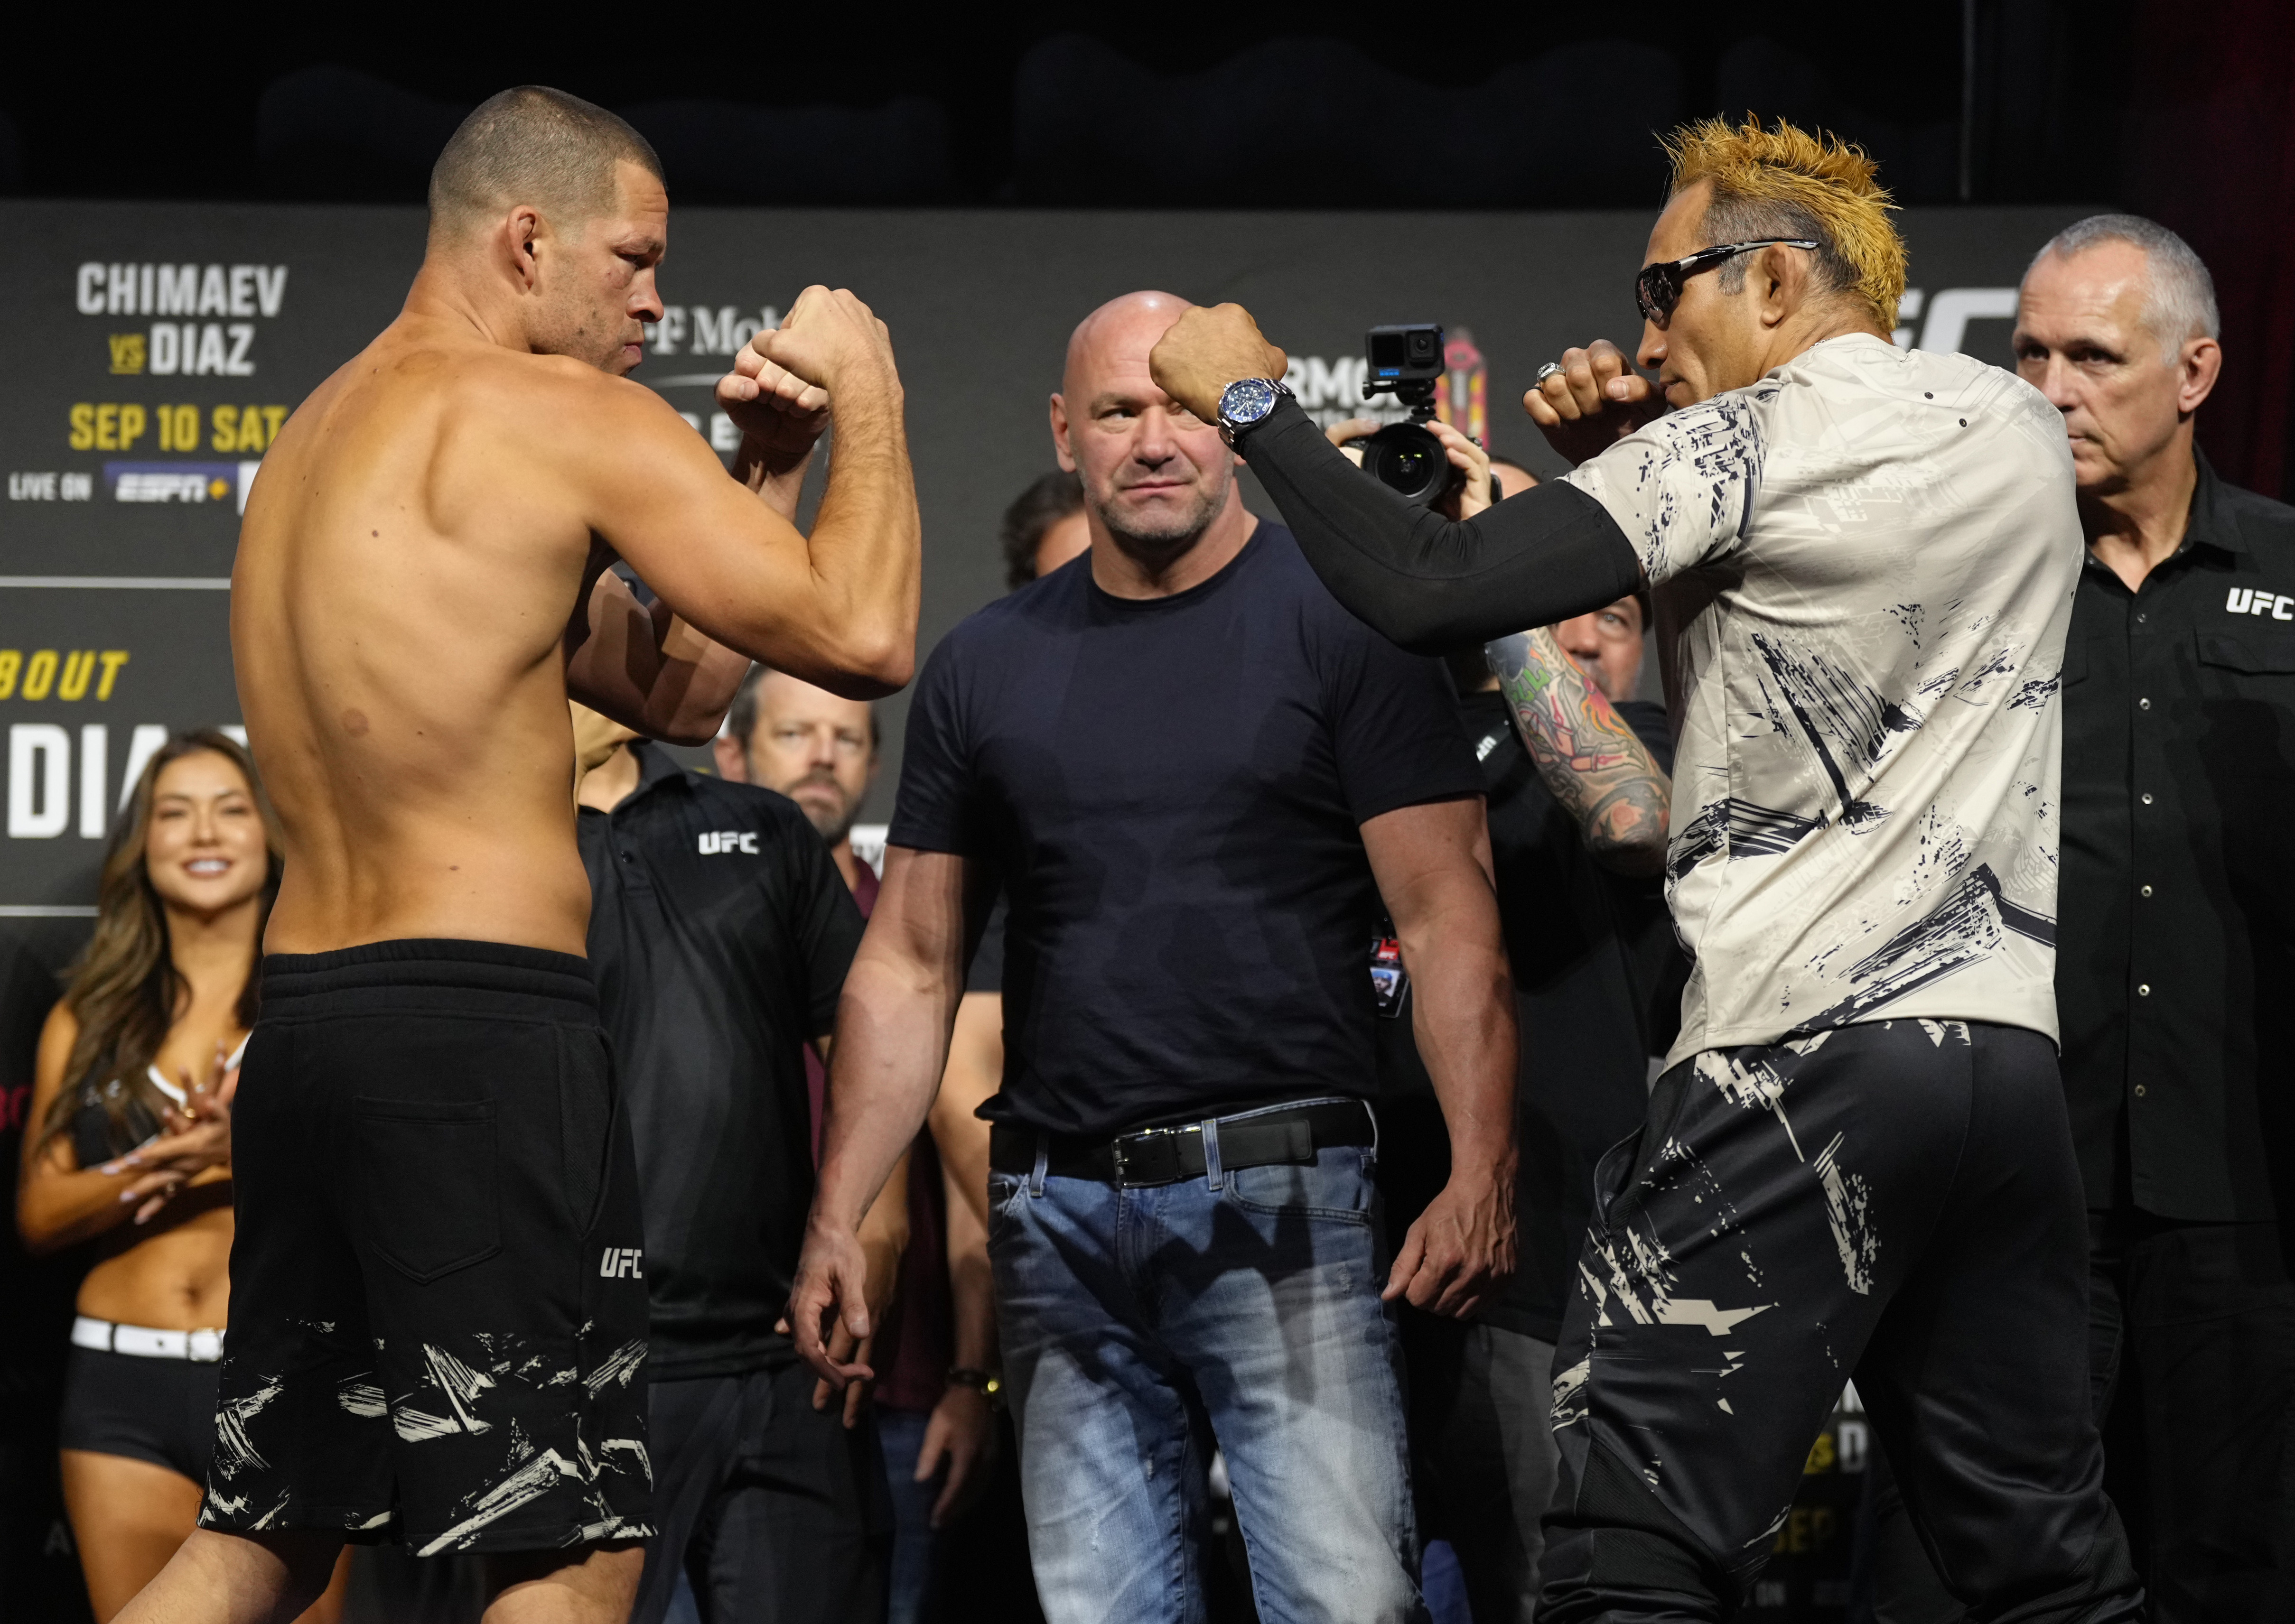 Opponents Nate Diaz and Tony Ferguson face off during the UFC 279 ceremonial weigh-in at MGM Grand Garden Arena on September 09, 2022 in Las Vegas, Nevada.